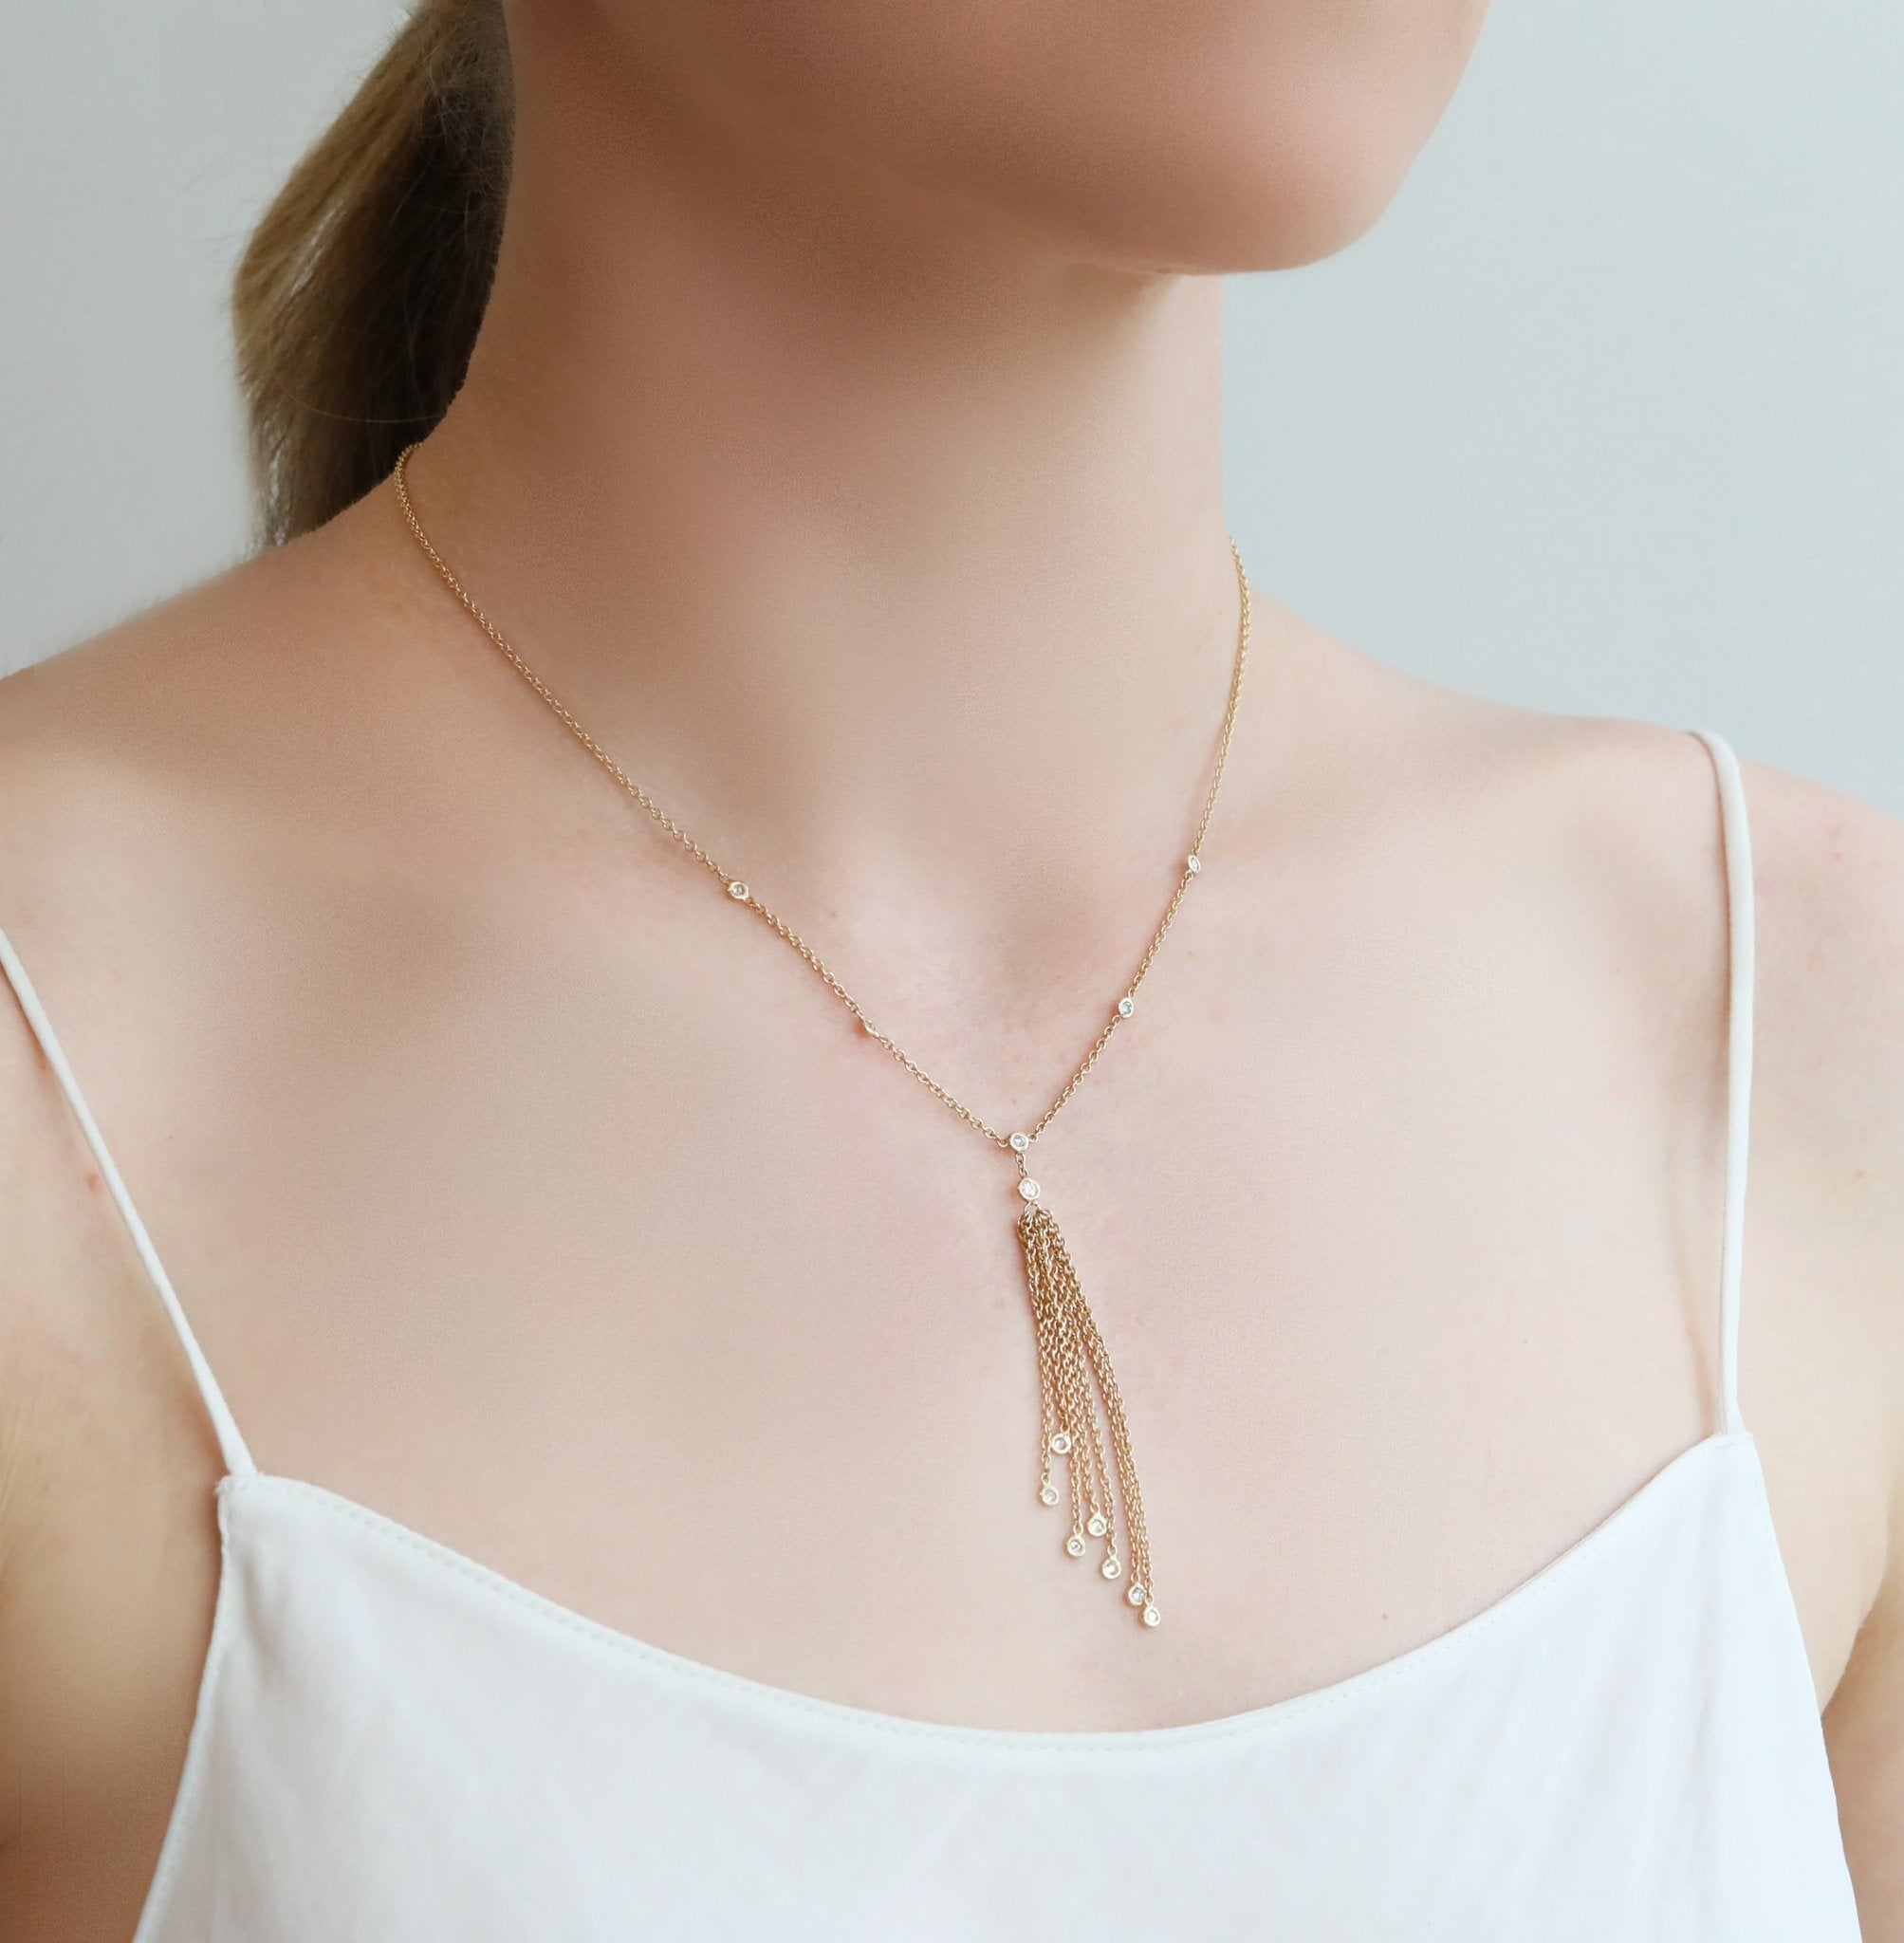 Jacquie Aiche Gold Tassel Chain Necklace with Diamond Details